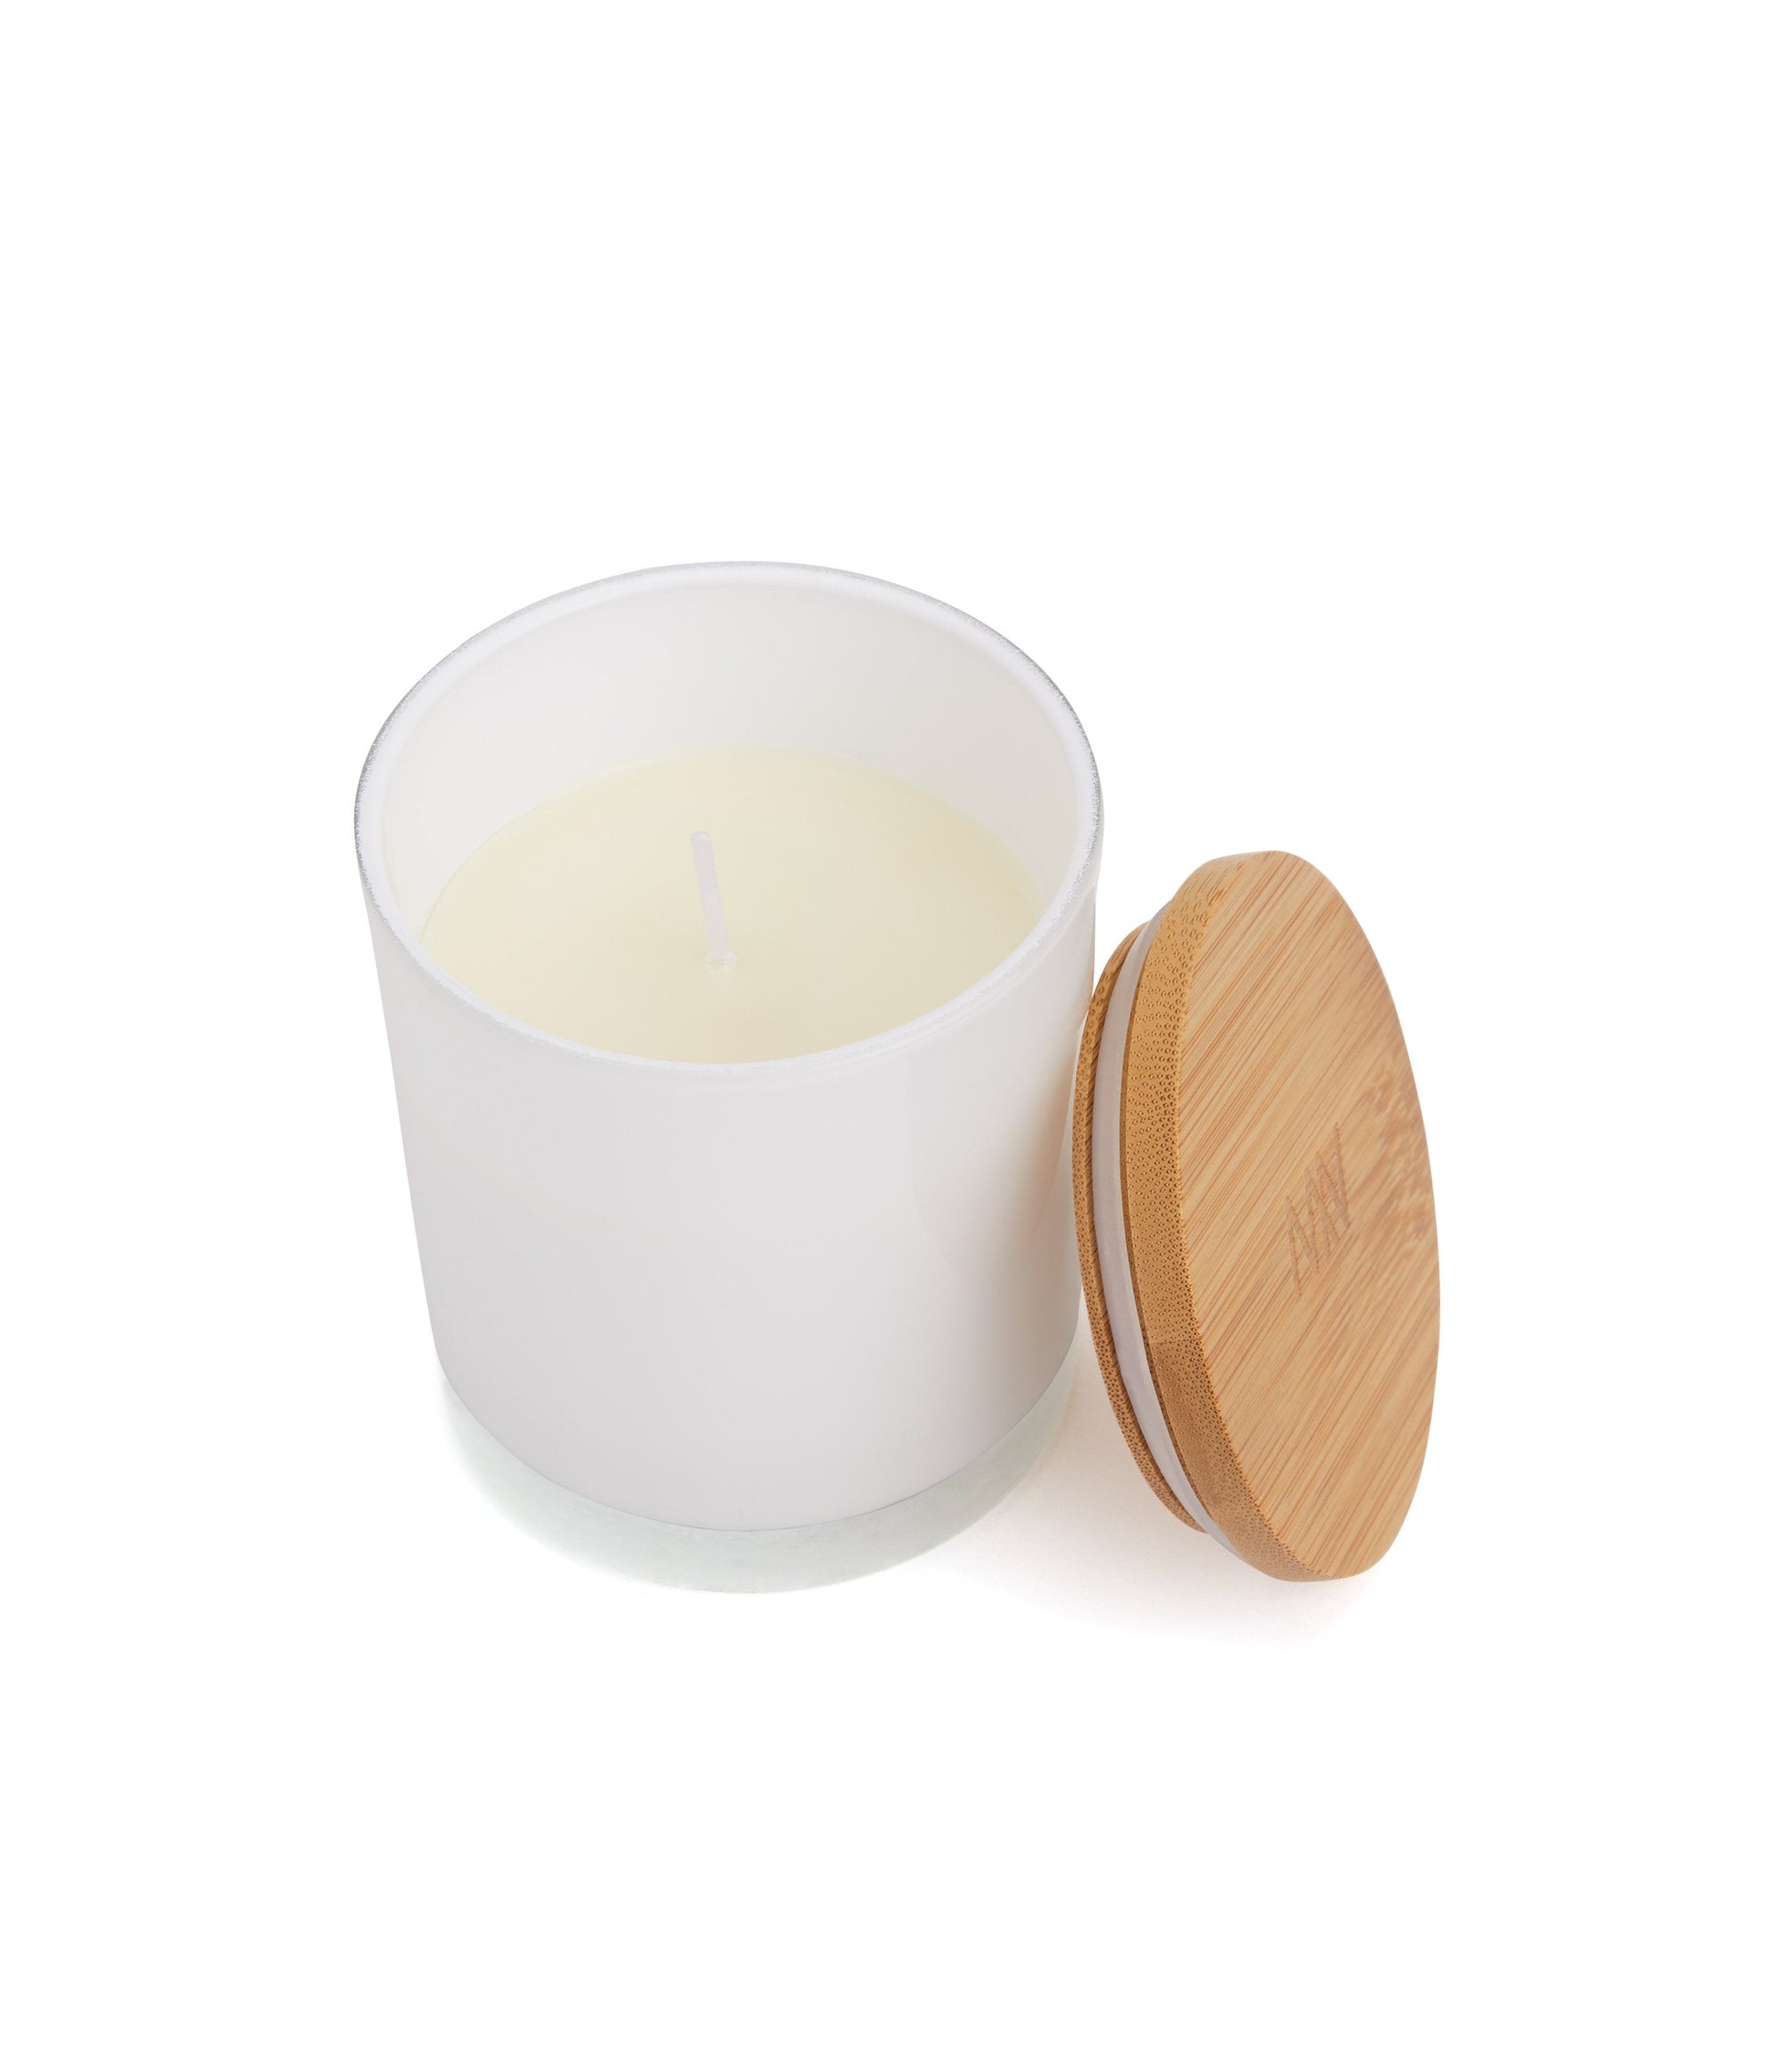 MIMOSA AT BRUNCH REG. ROUND Candle | Color: White - variant::white